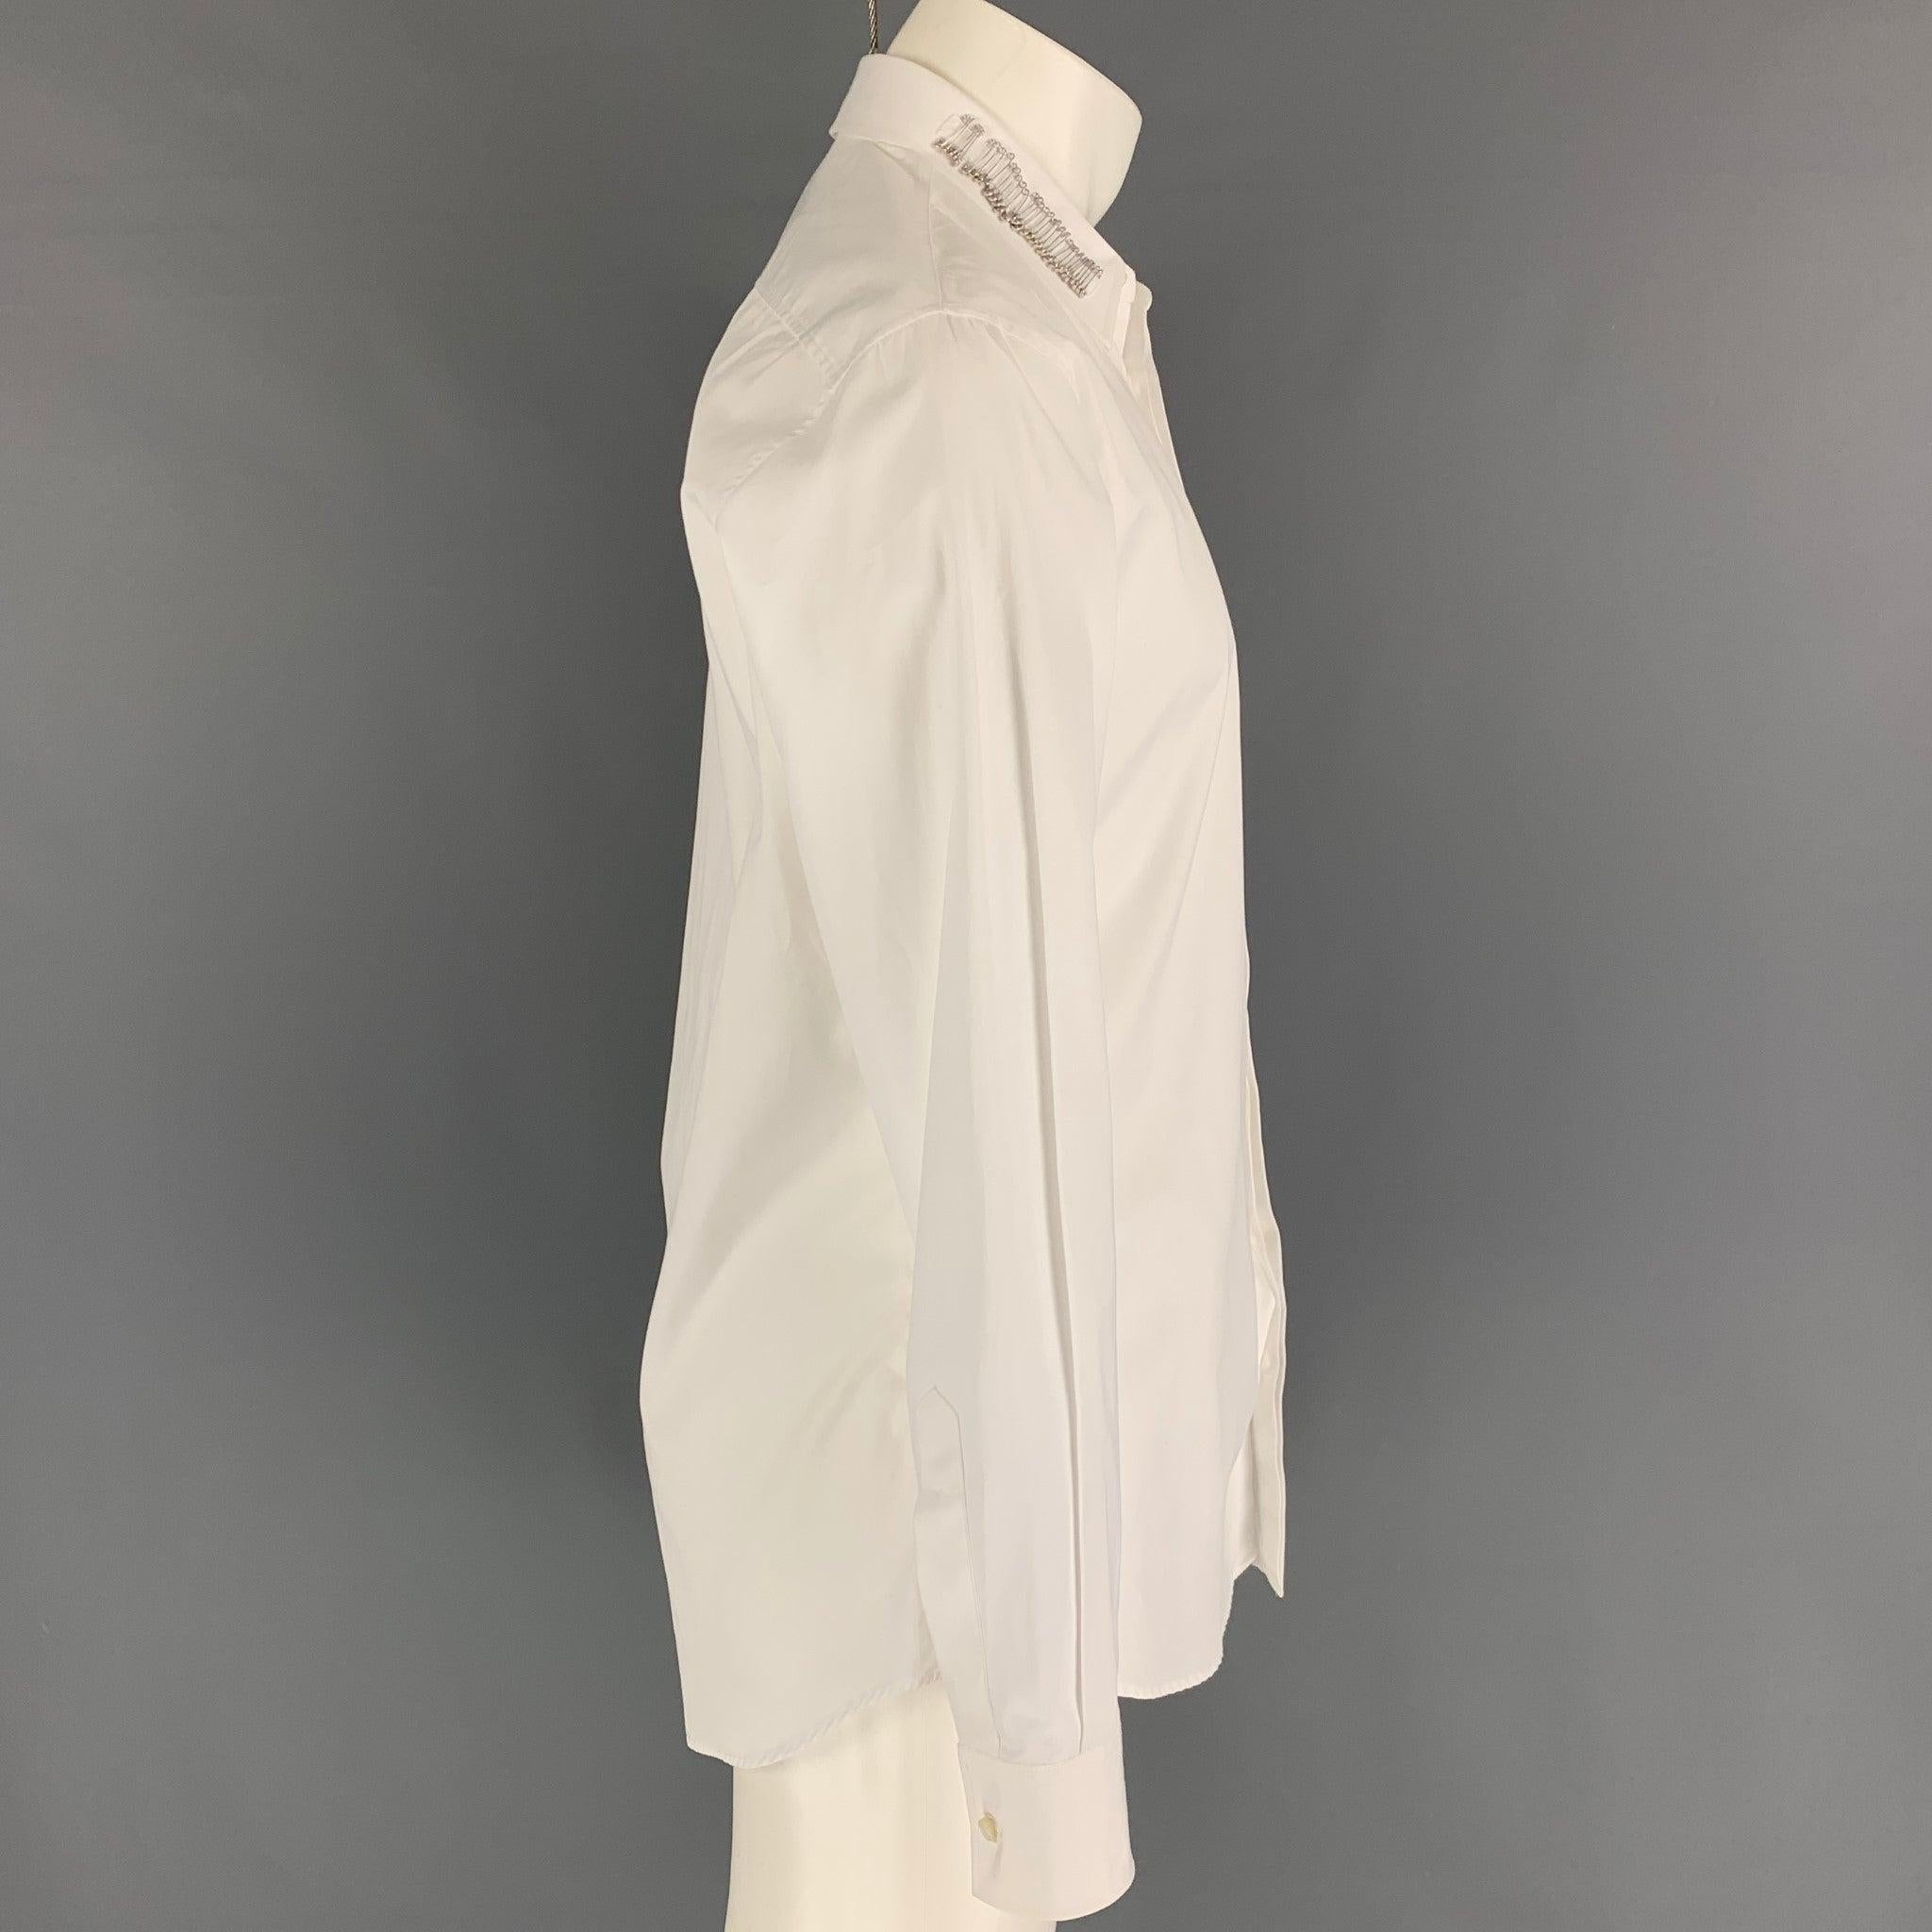 DSQUARED2 Size S White Cotton Hidden Placket Long Sleeve Shirt In Good Condition For Sale In San Francisco, CA